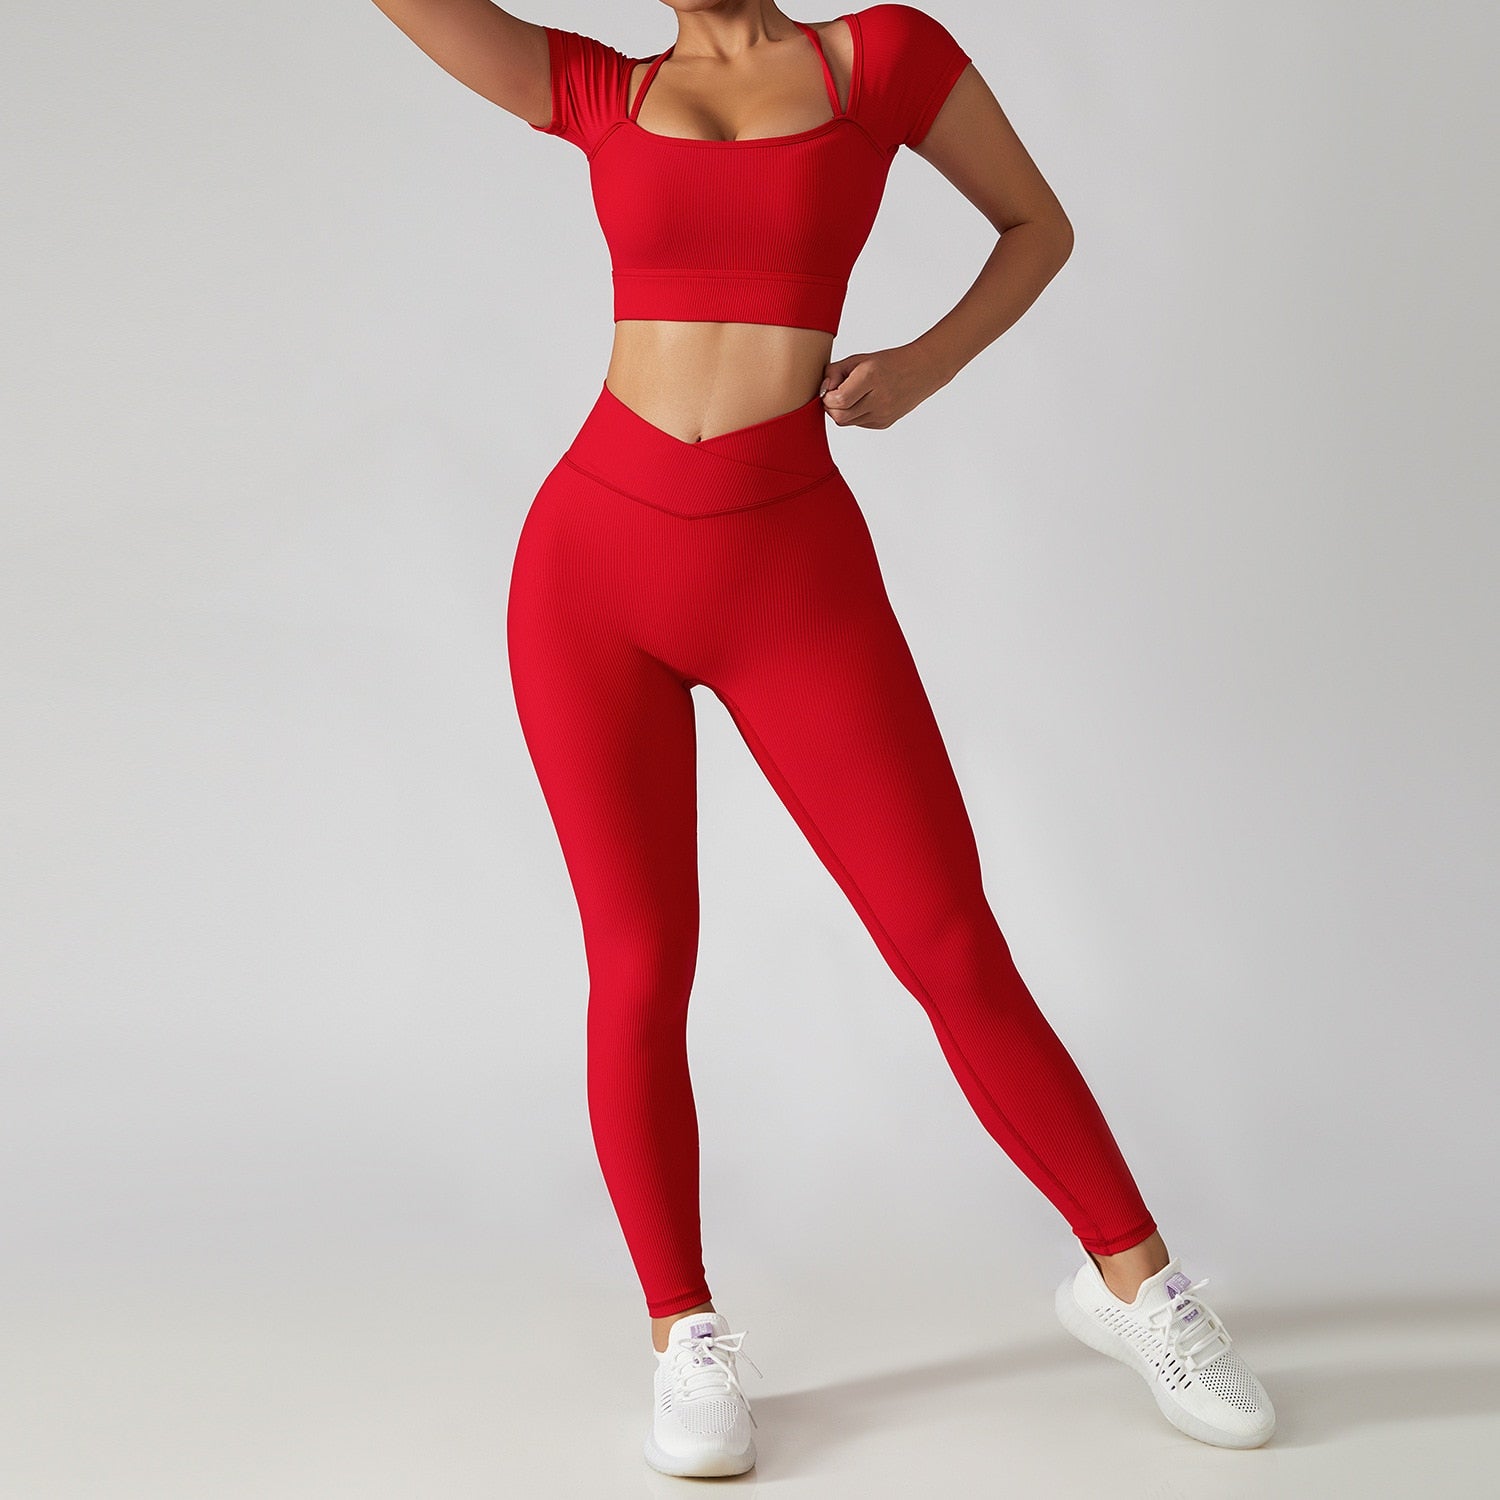 Women's Two Piece Red Ribbed Modern Short Sleeve Top High Waisted Yoga Leggings Workout Set